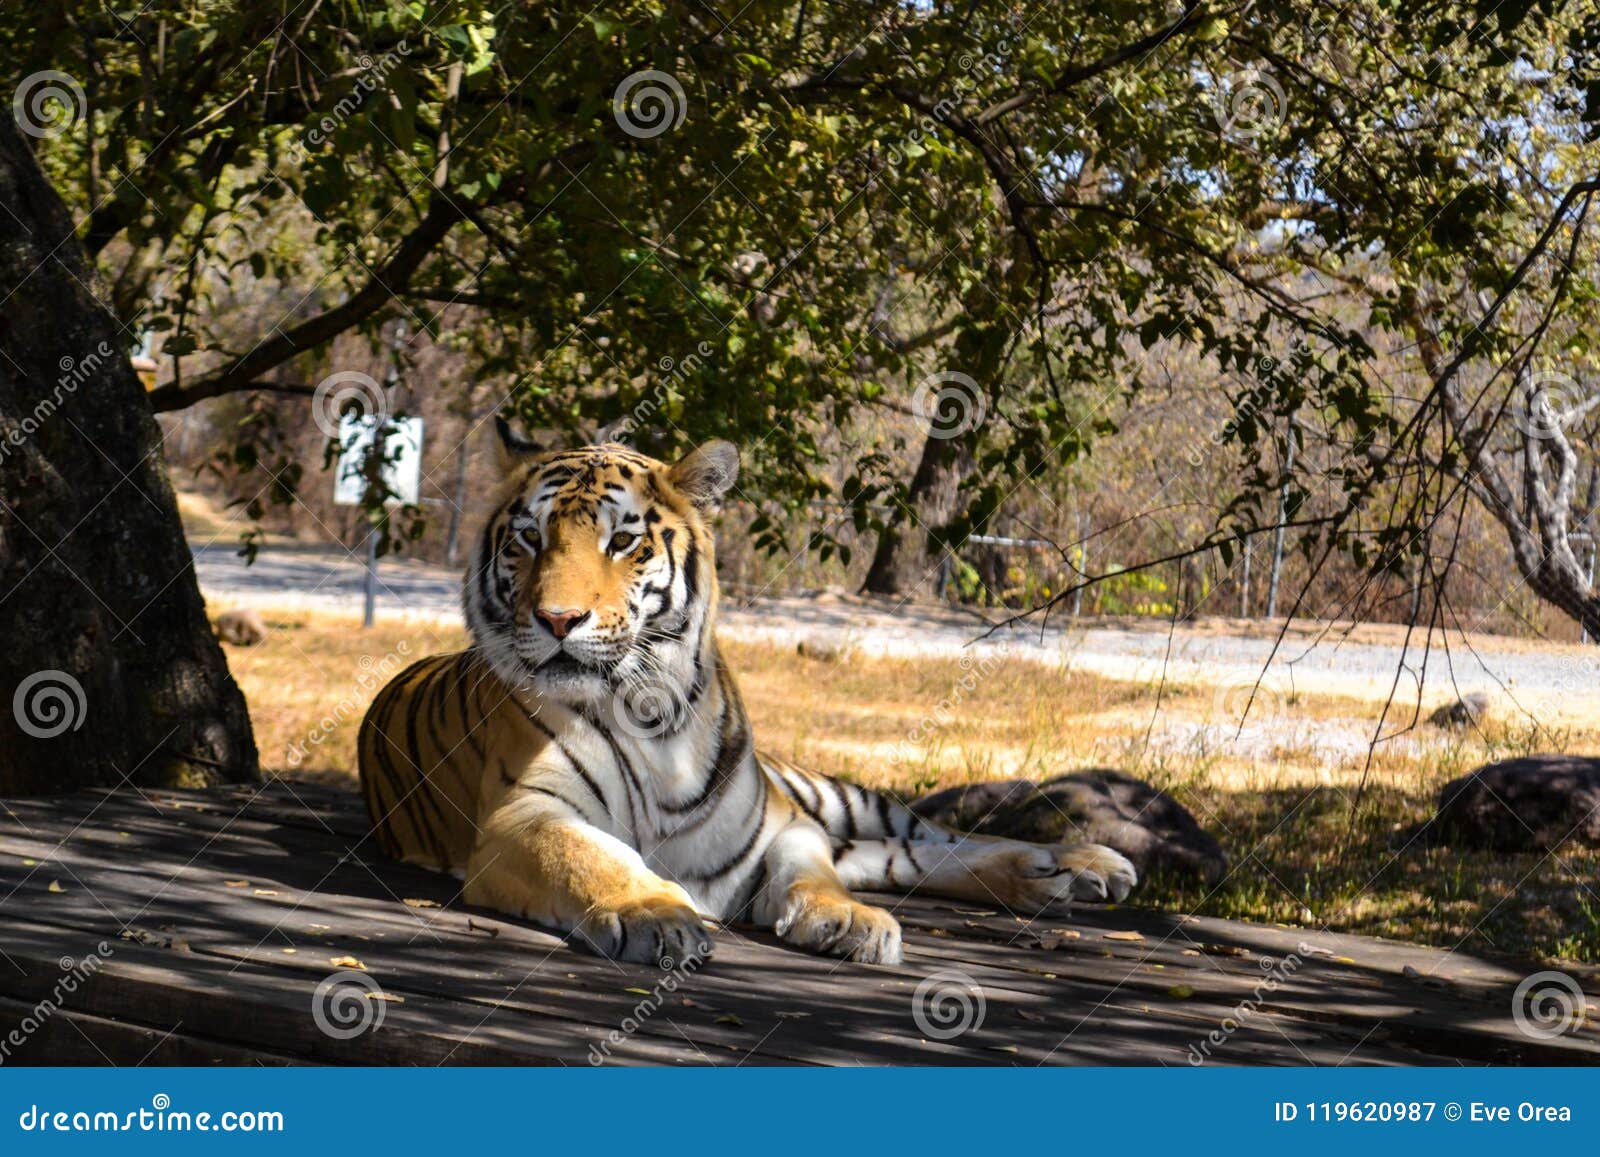 bengal tiger resting in a nature reserve